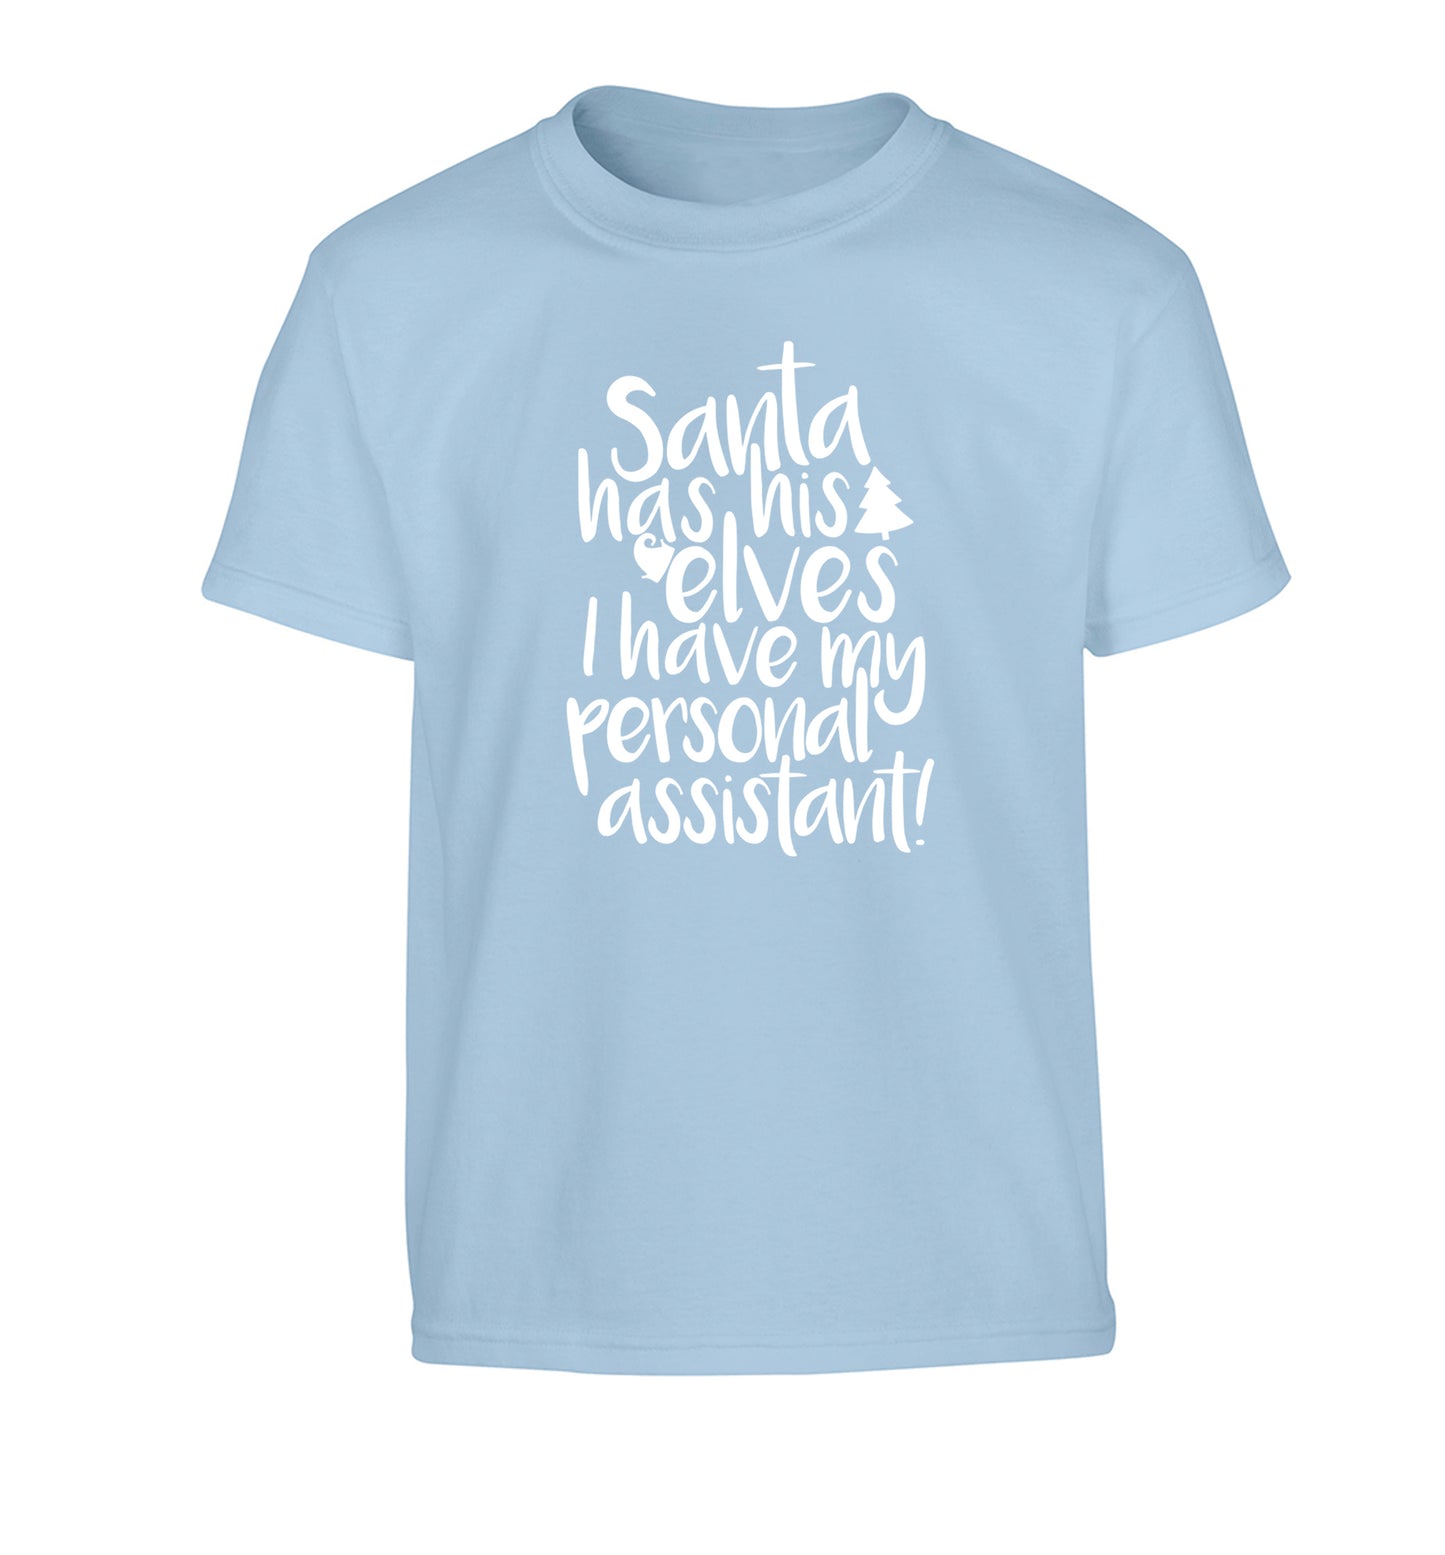 Santa has his elves I have my personal assistant Children's light blue Tshirt 12-14 Years